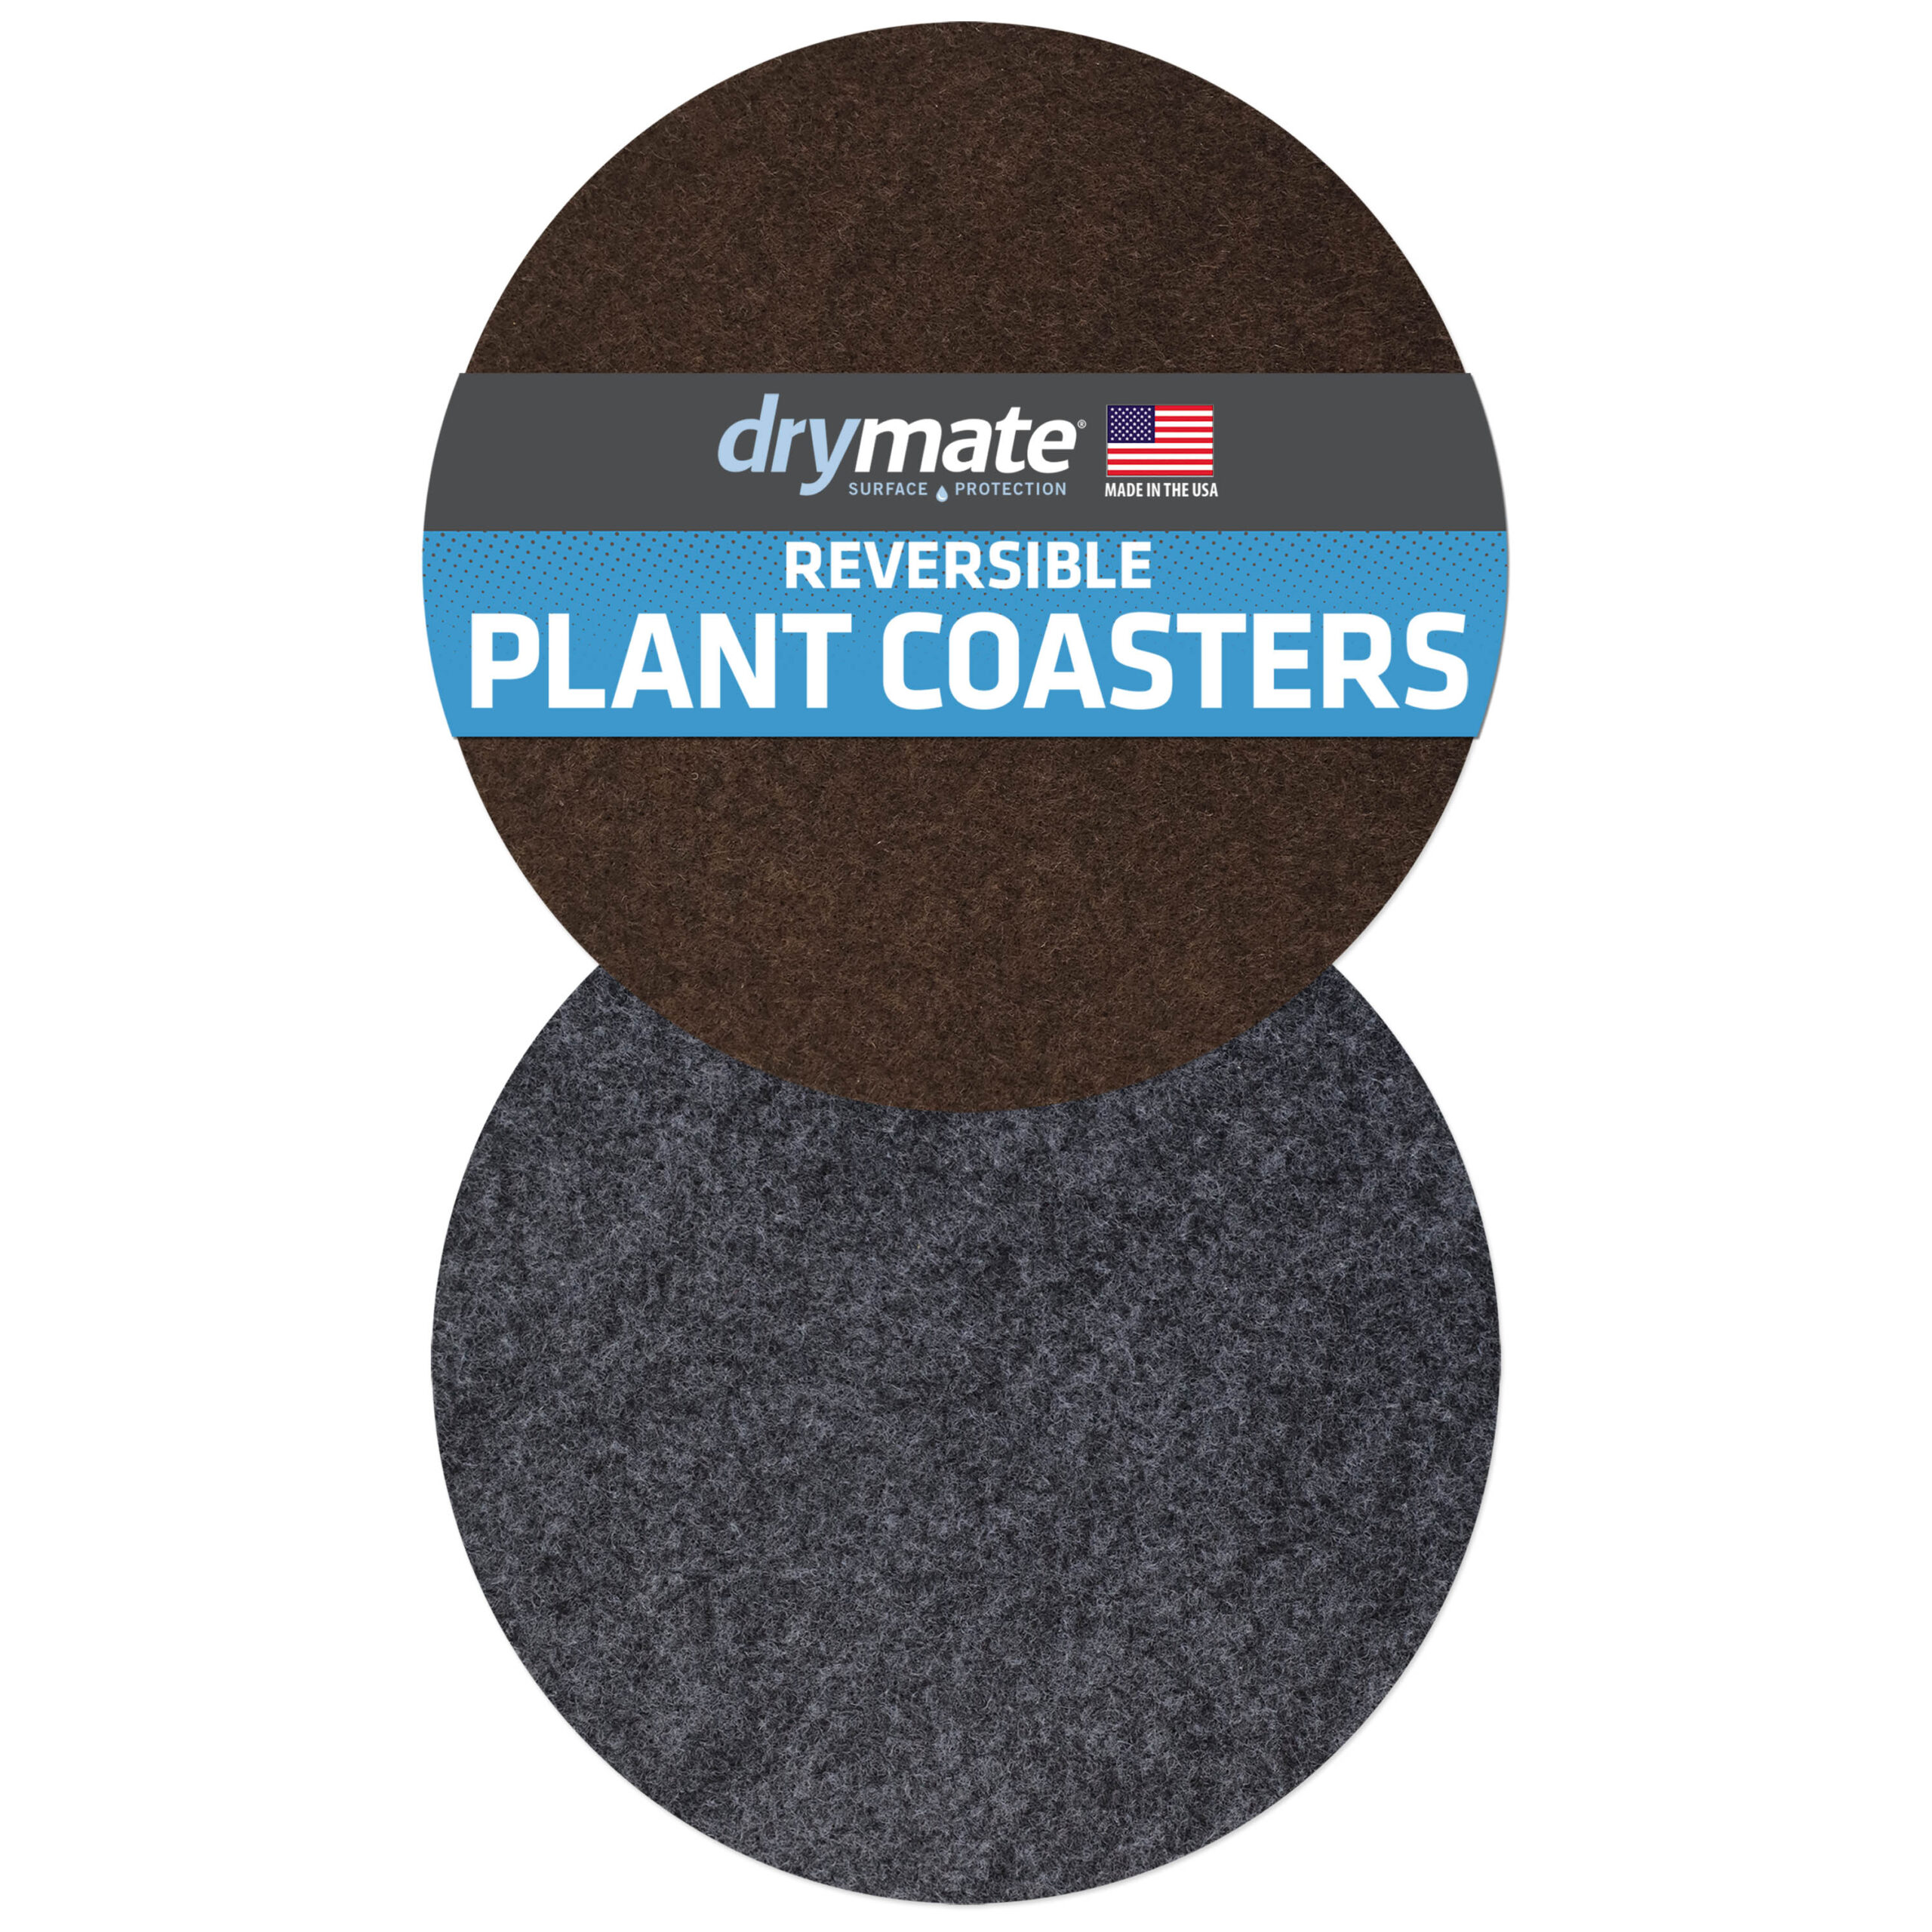 https://drymate.com/wp-content/uploads/2021/07/8-Inch-Plant-Coaster_Brown-Grey_w_Label-reversible-plant-coasters-mats-pad-drink-absorbent-waterproof-fabric-usa-made-recycled-scaled.jpg